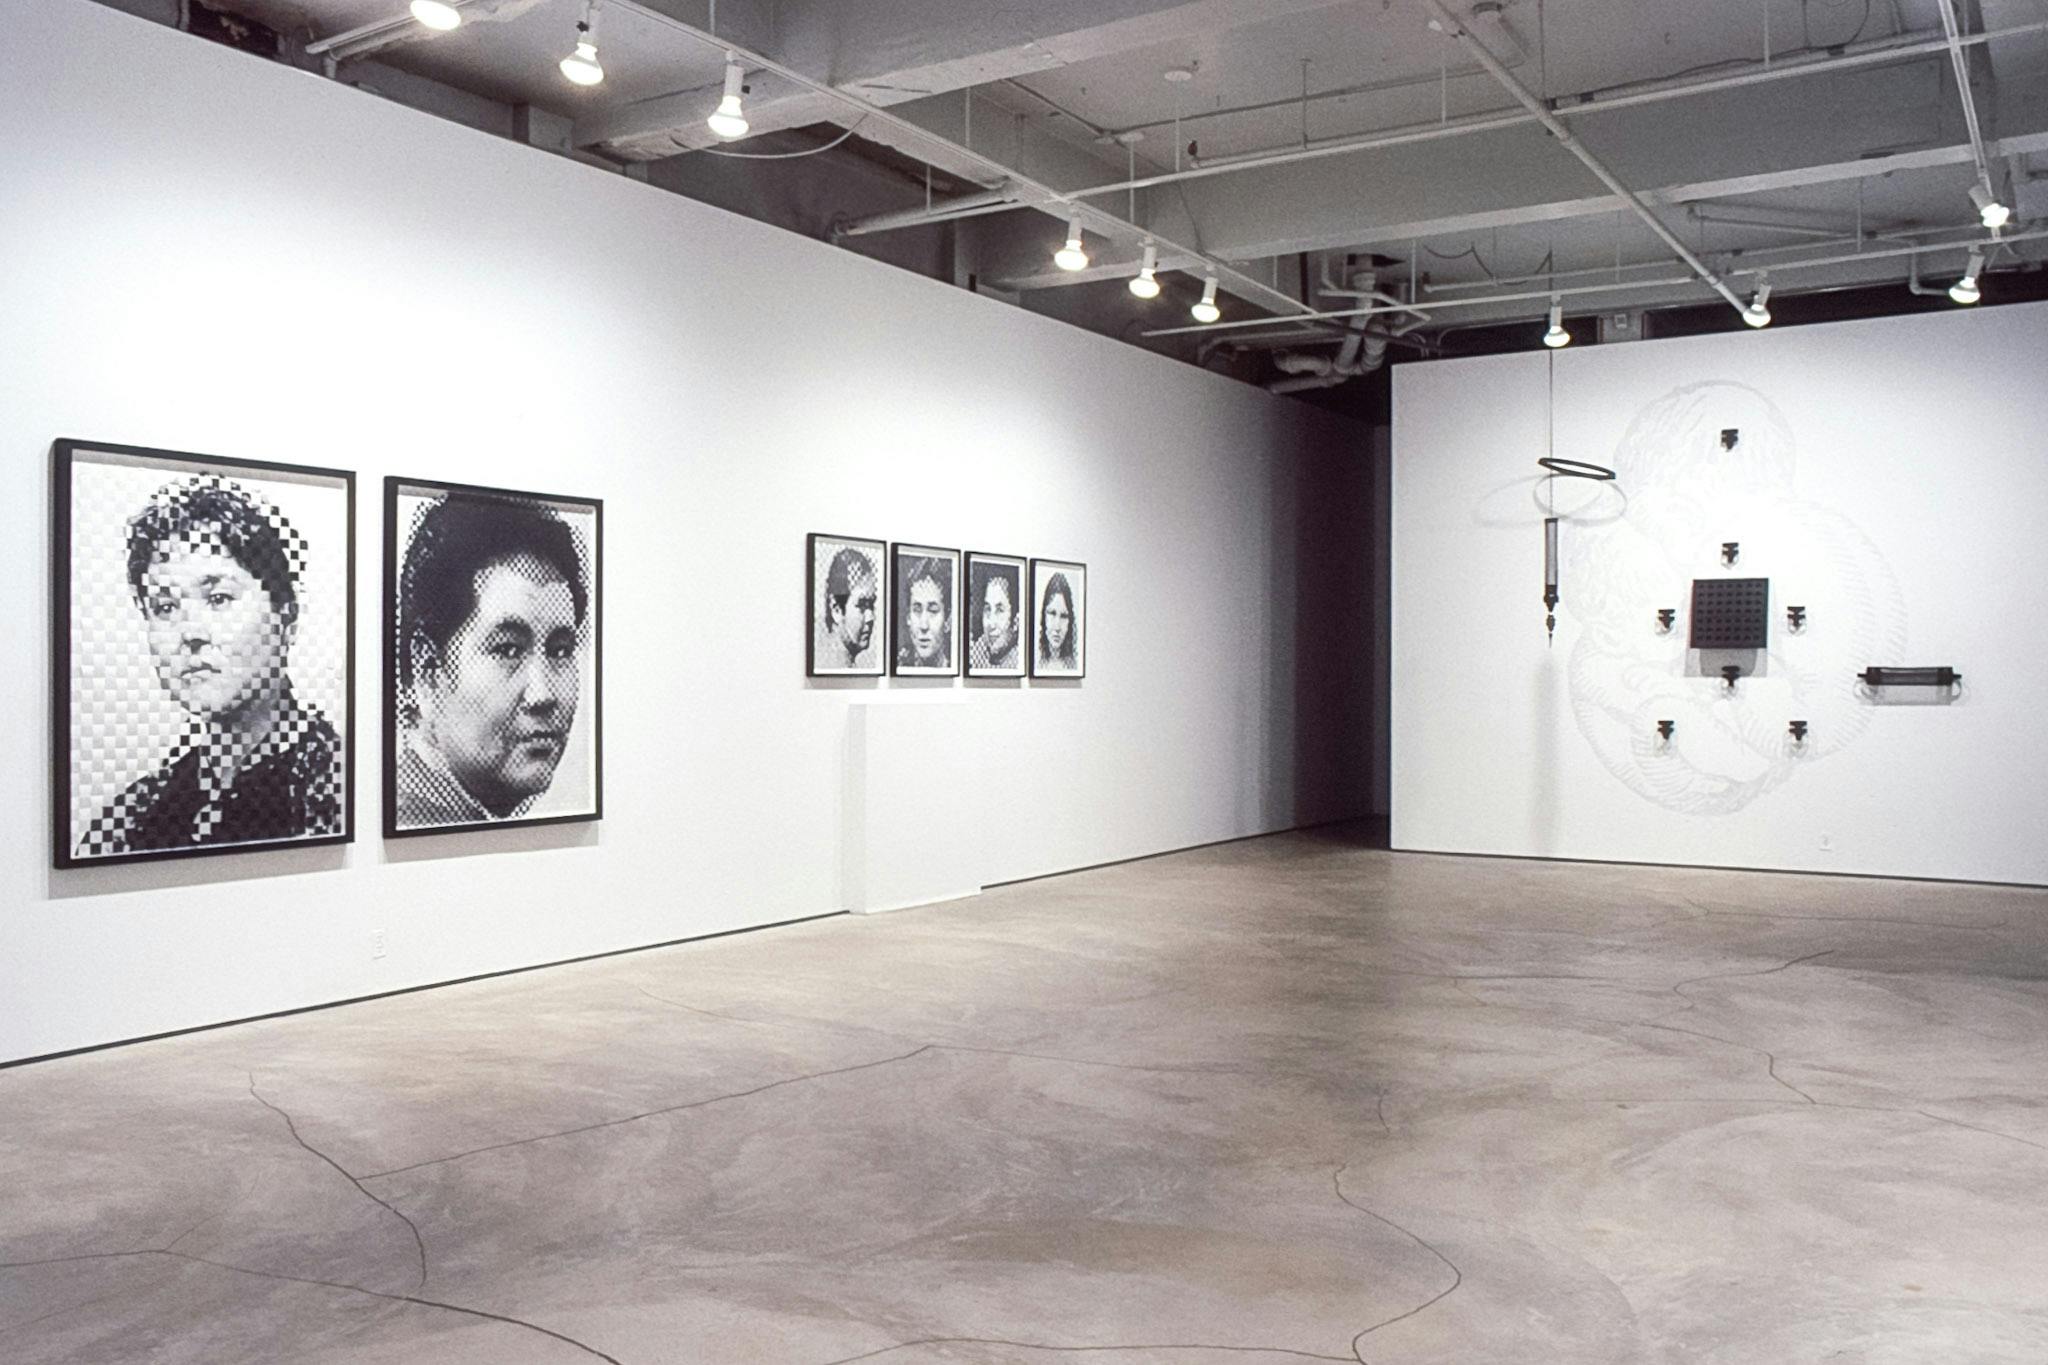 An installation view of the gallery shows artworks mounted on the walls. A group of black sculptures are on the right-side wall, and six black and white portrait photographs are on the left-side wall. 